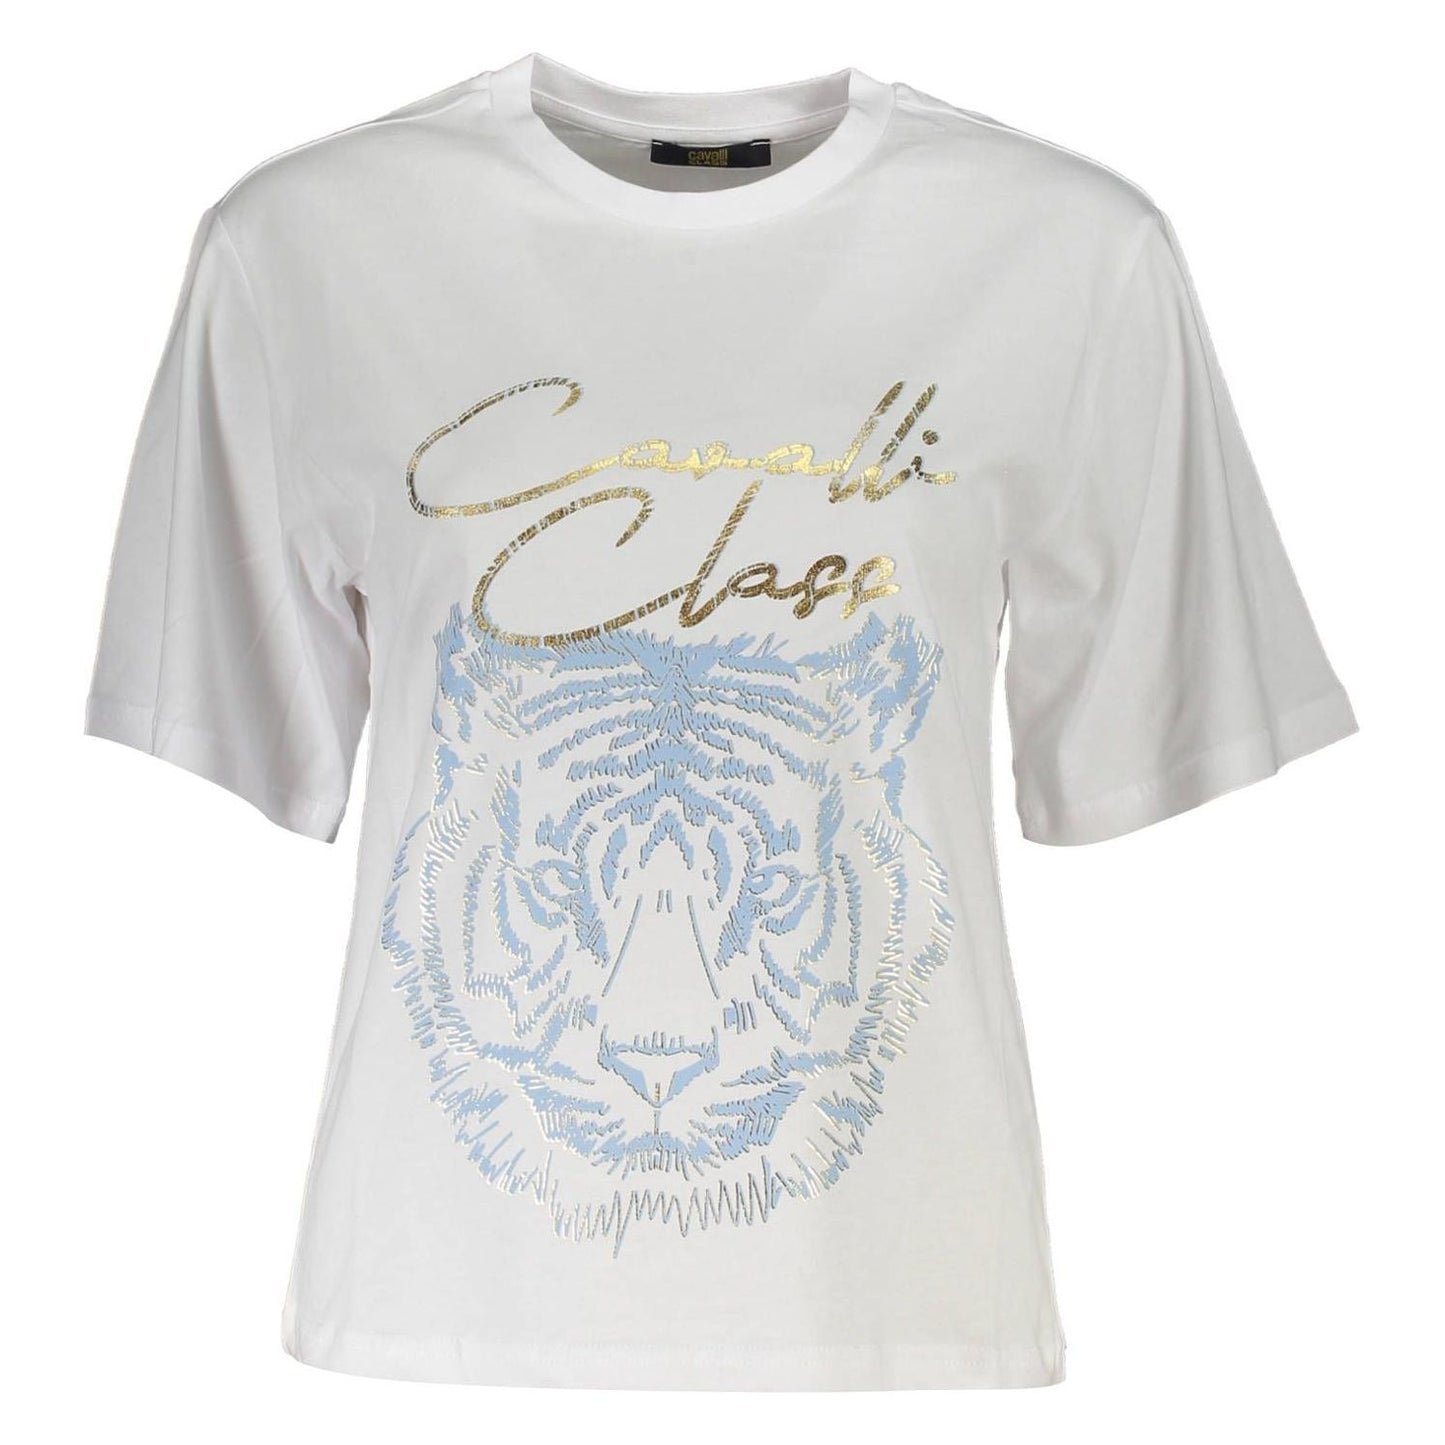 Cavalli Class Chic White Printed Tee with Timeless Elegance chic-white-printed-tee-with-timeless-elegance